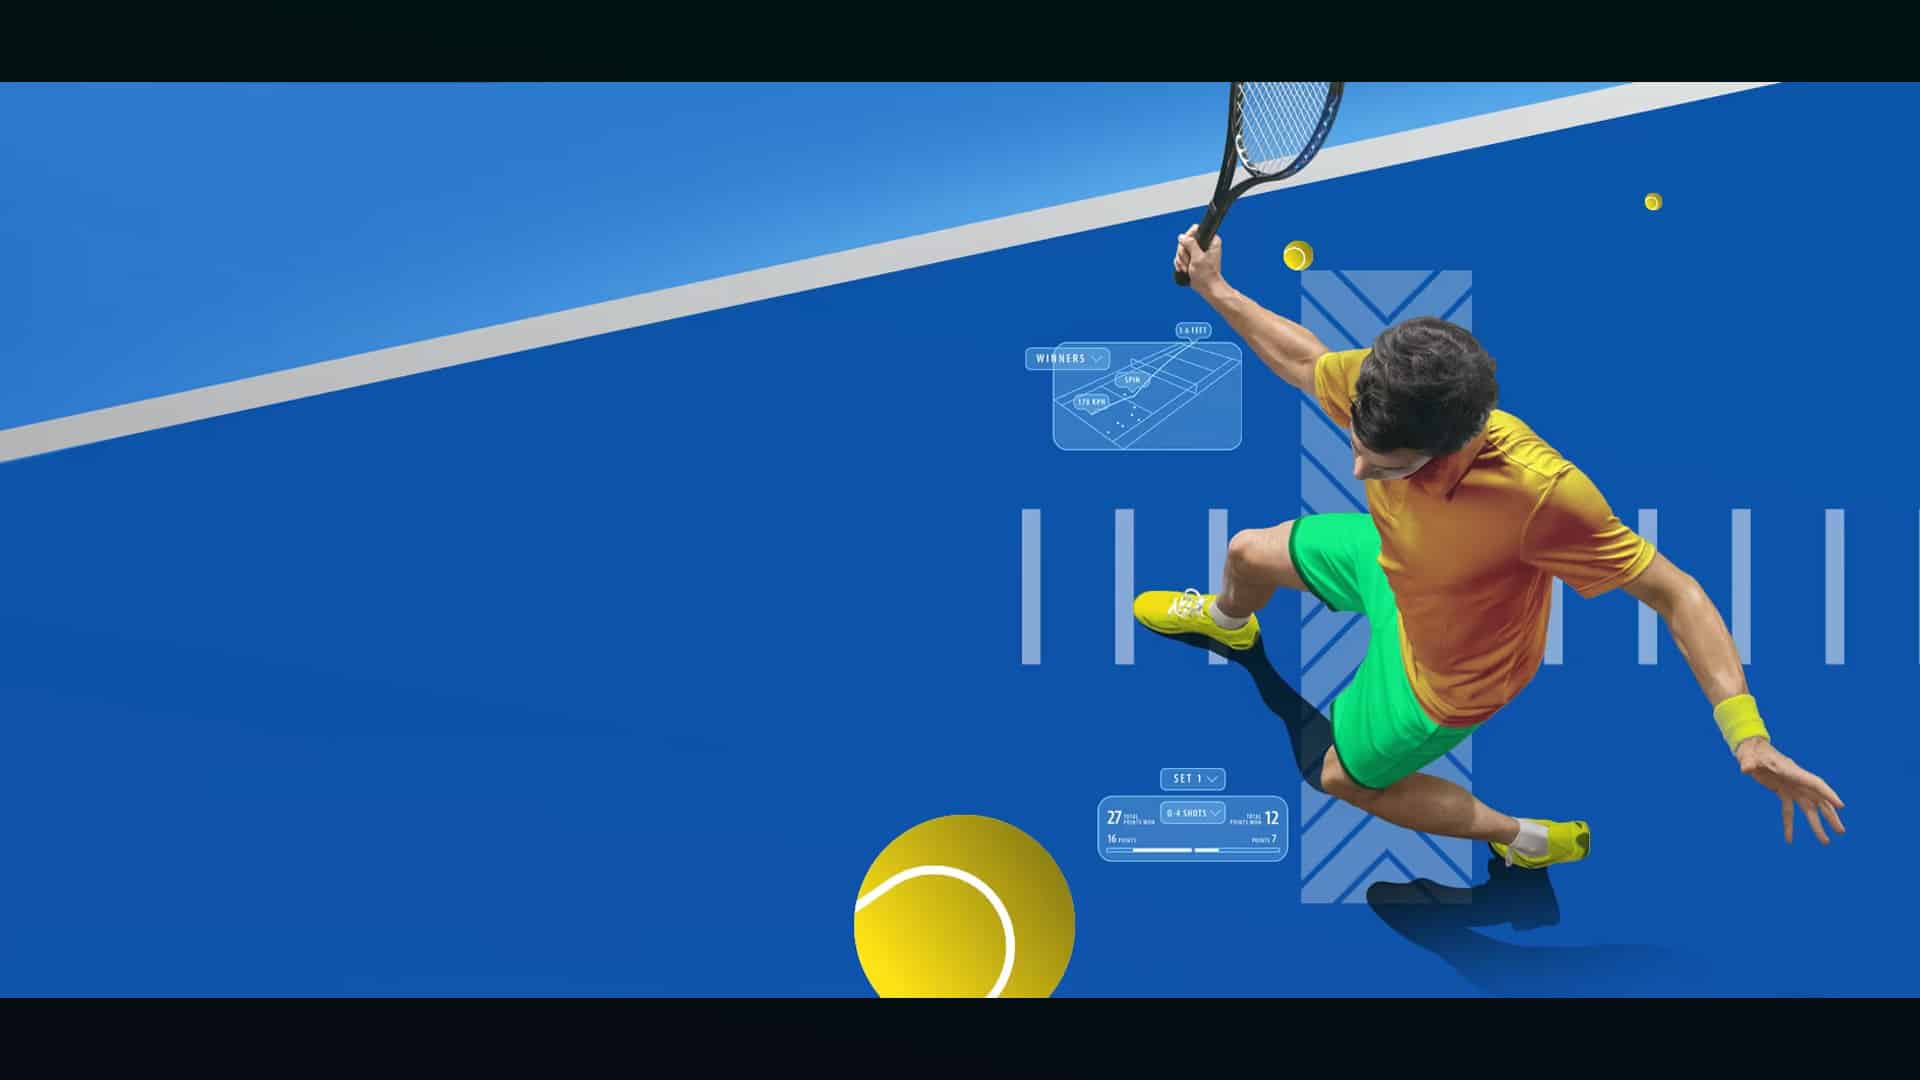 Infosys serves up purpose-driven digital innovations with sustainability off-court and AI on-court at the Australian Open 2023